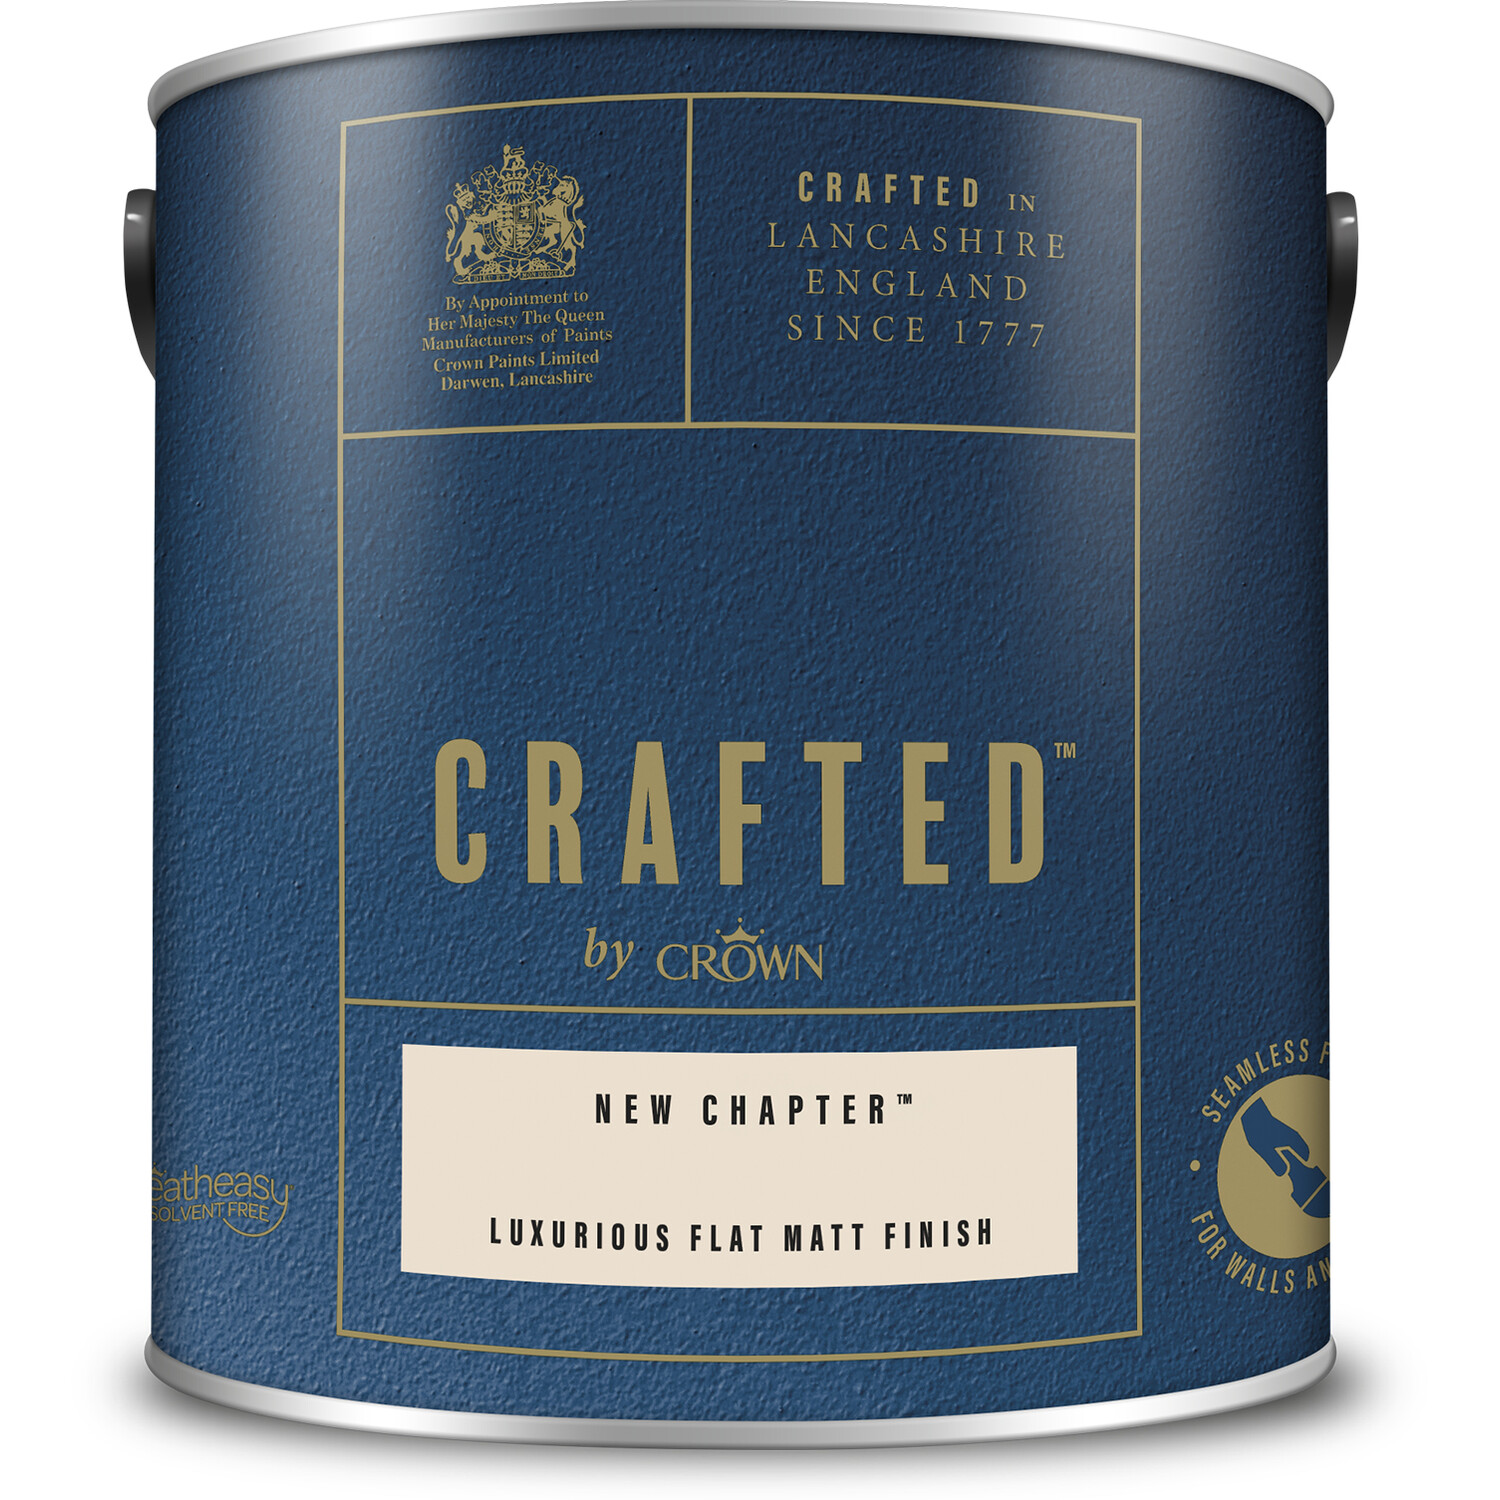 Crown Crafted Walls and Wood New Chapter Luxurious Flat Matt Paint 2.5L Image 2